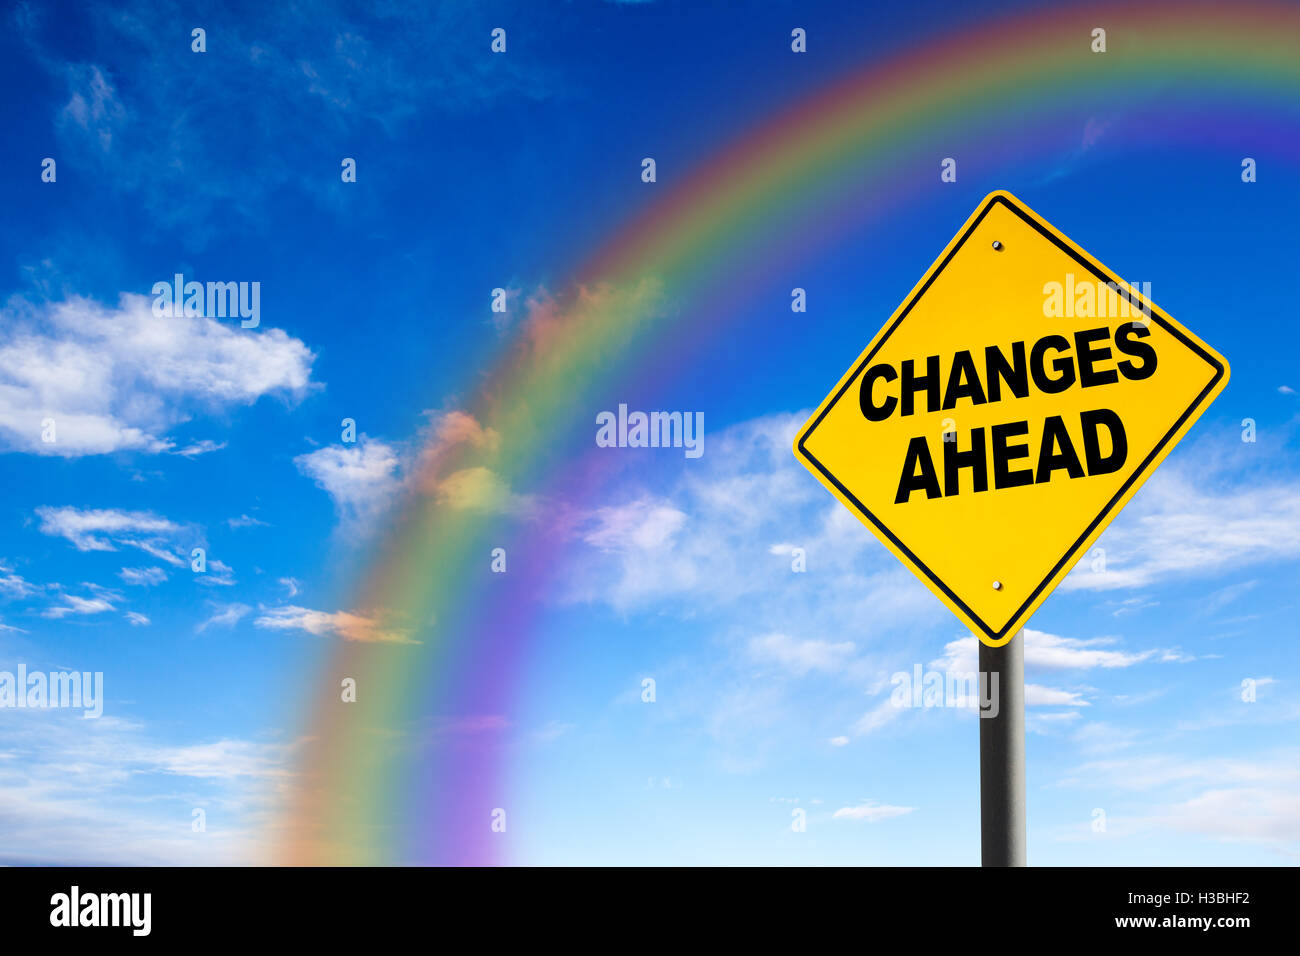 Changes Ahead sign against a blue sky with rainbow. Concept of situation change for the better. Stock Photo